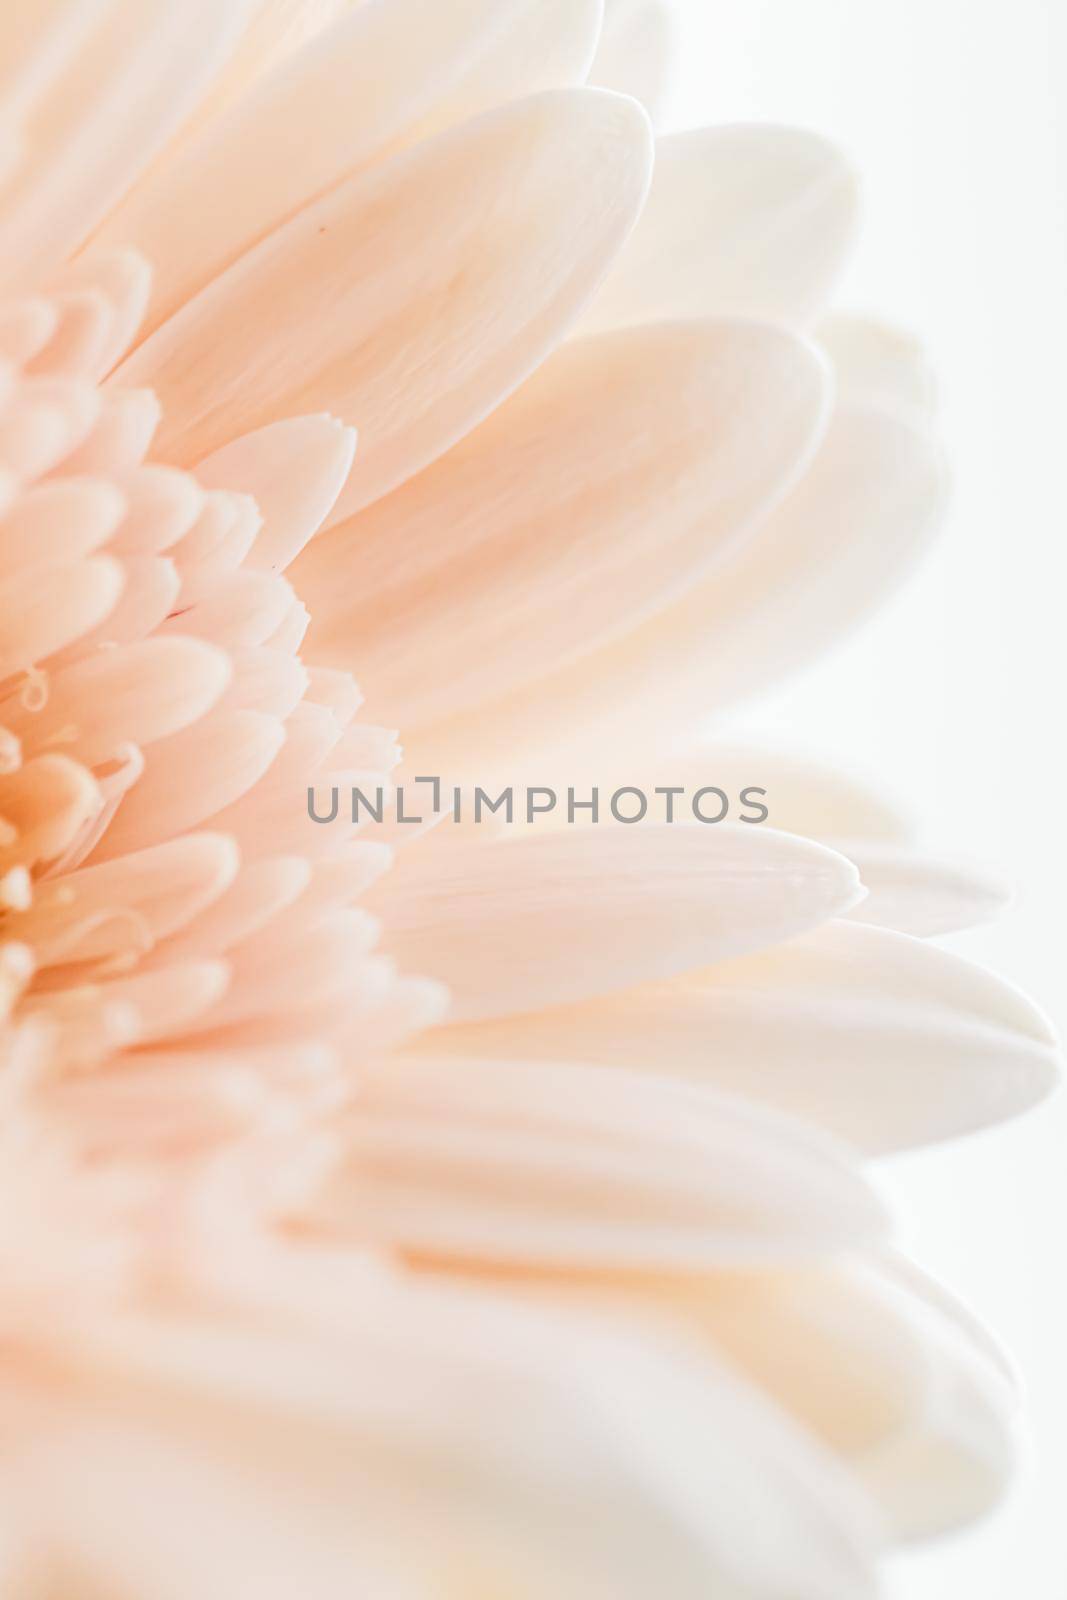 Beauty of a daisy flower, floral art and beauty in nature by Anneleven